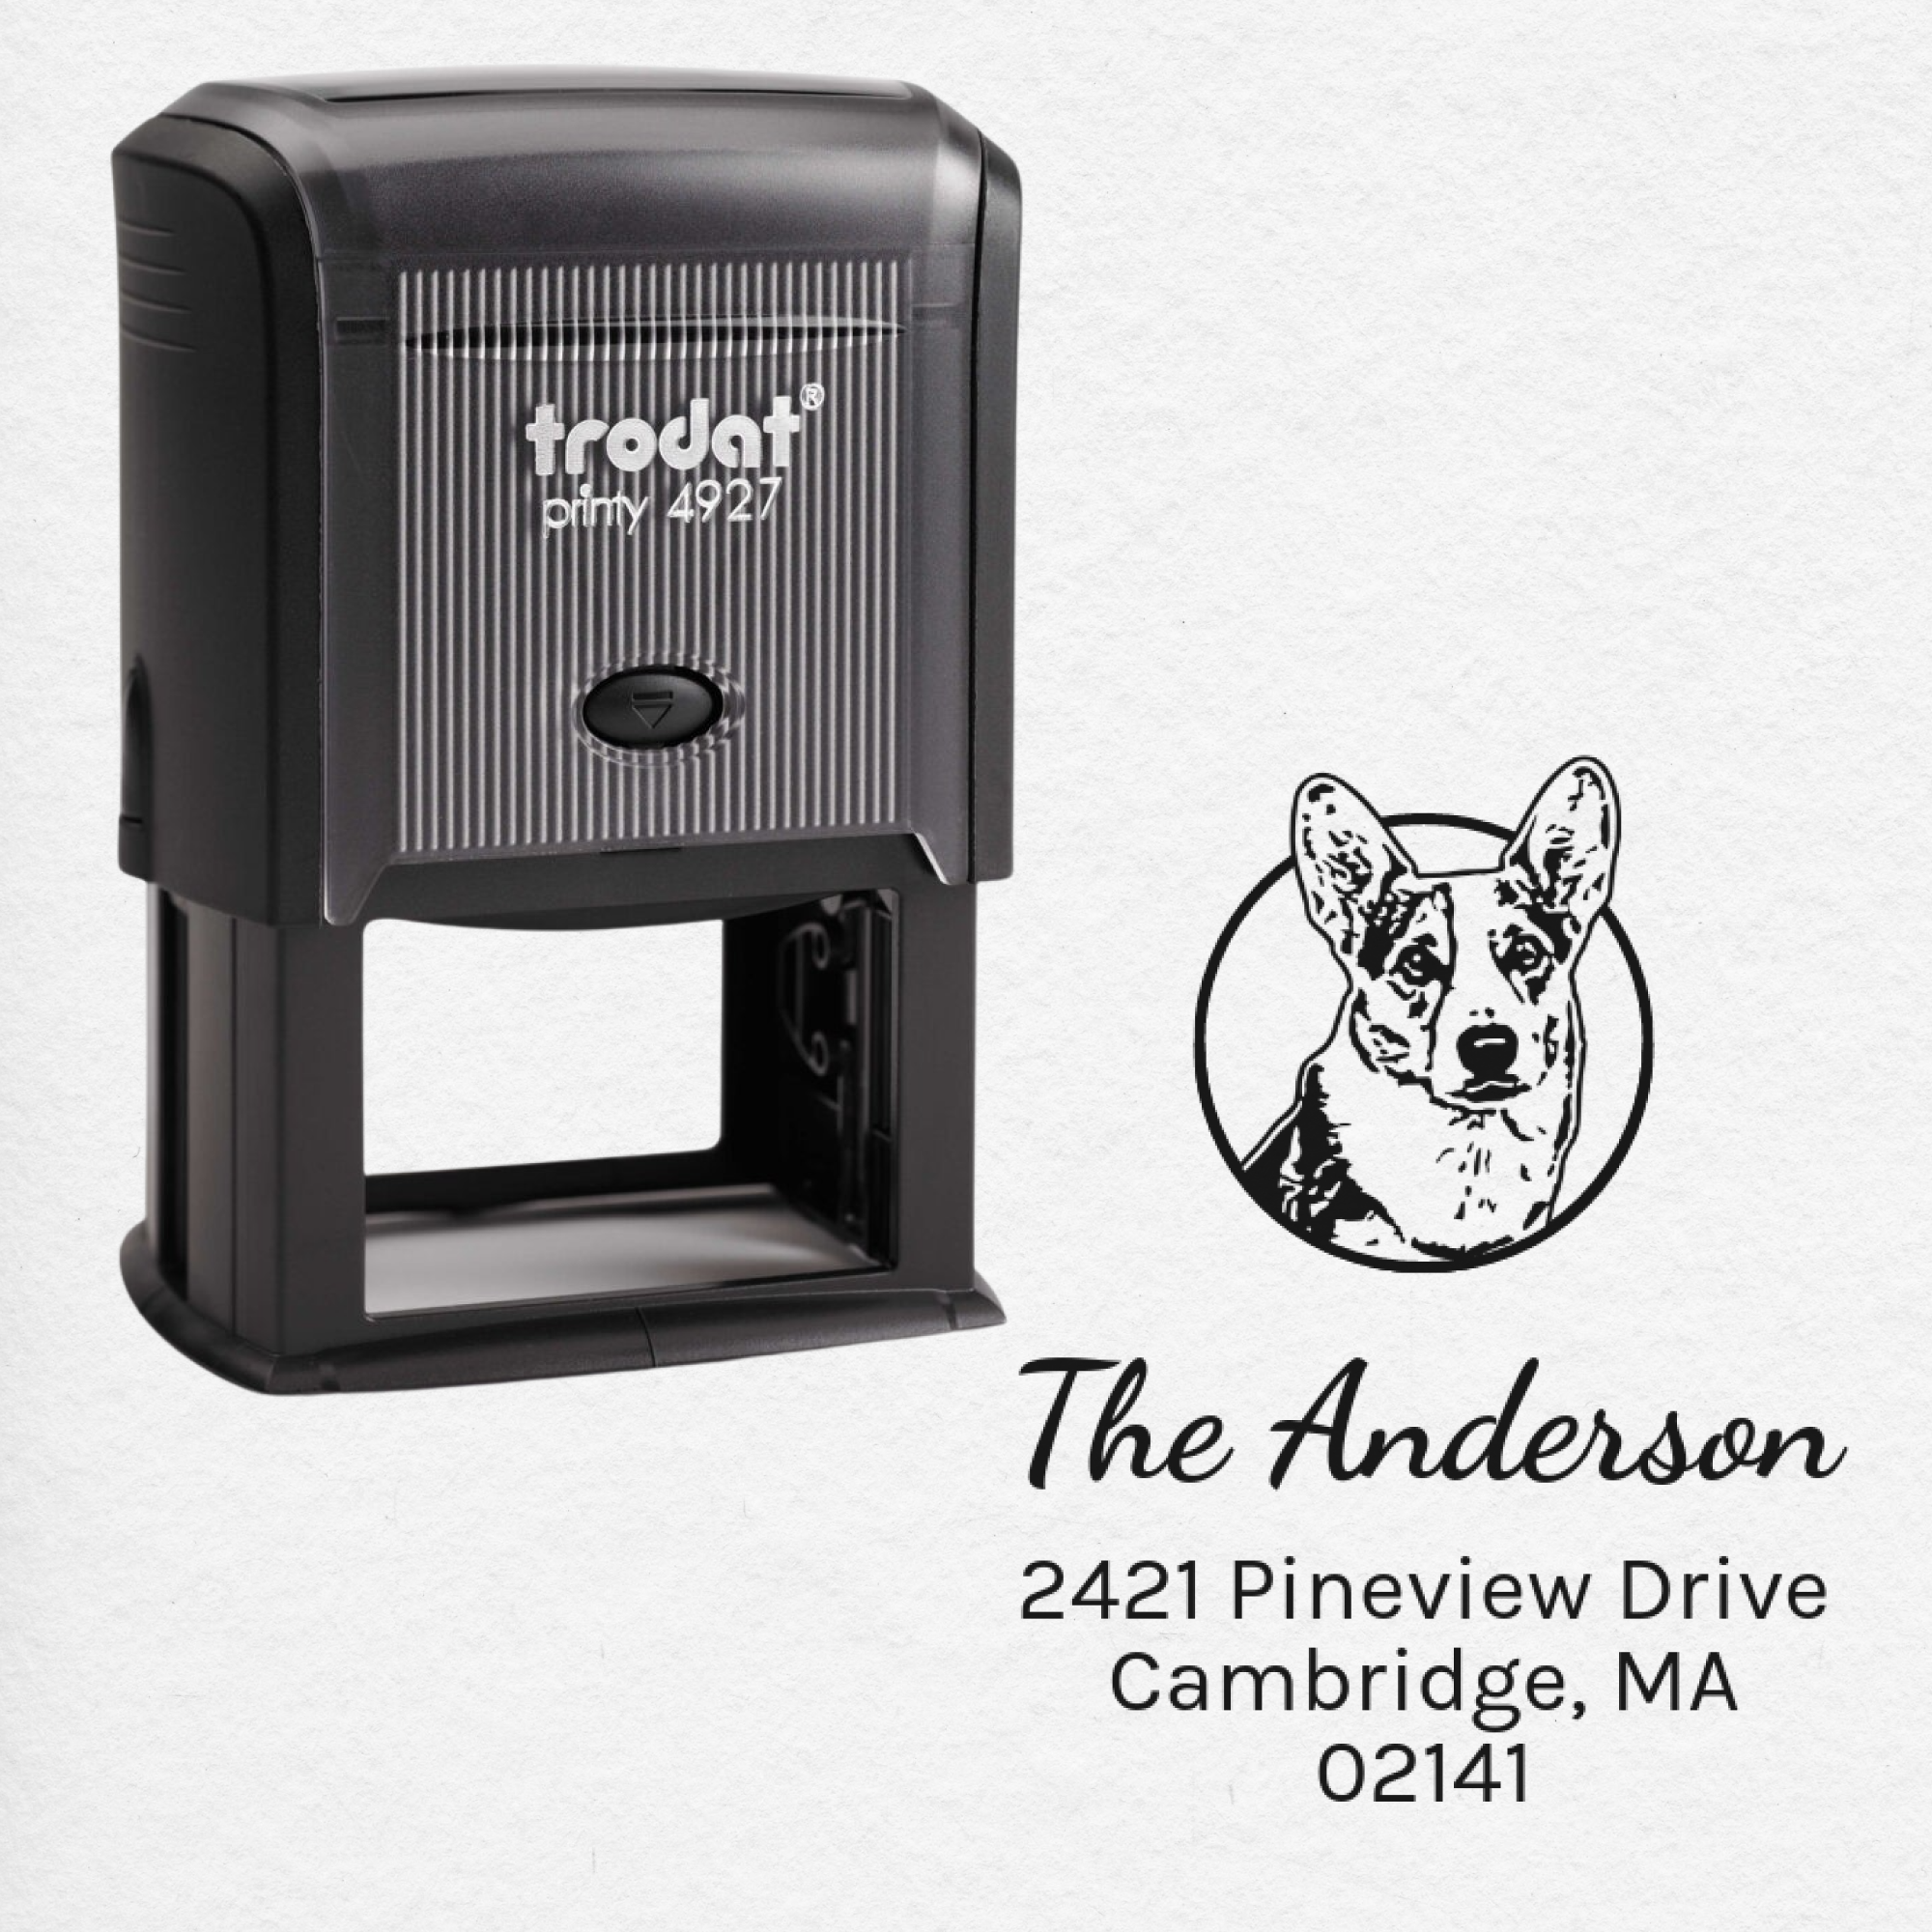 Images of Face Address Stamp (Self-Inking Stamp) (1)